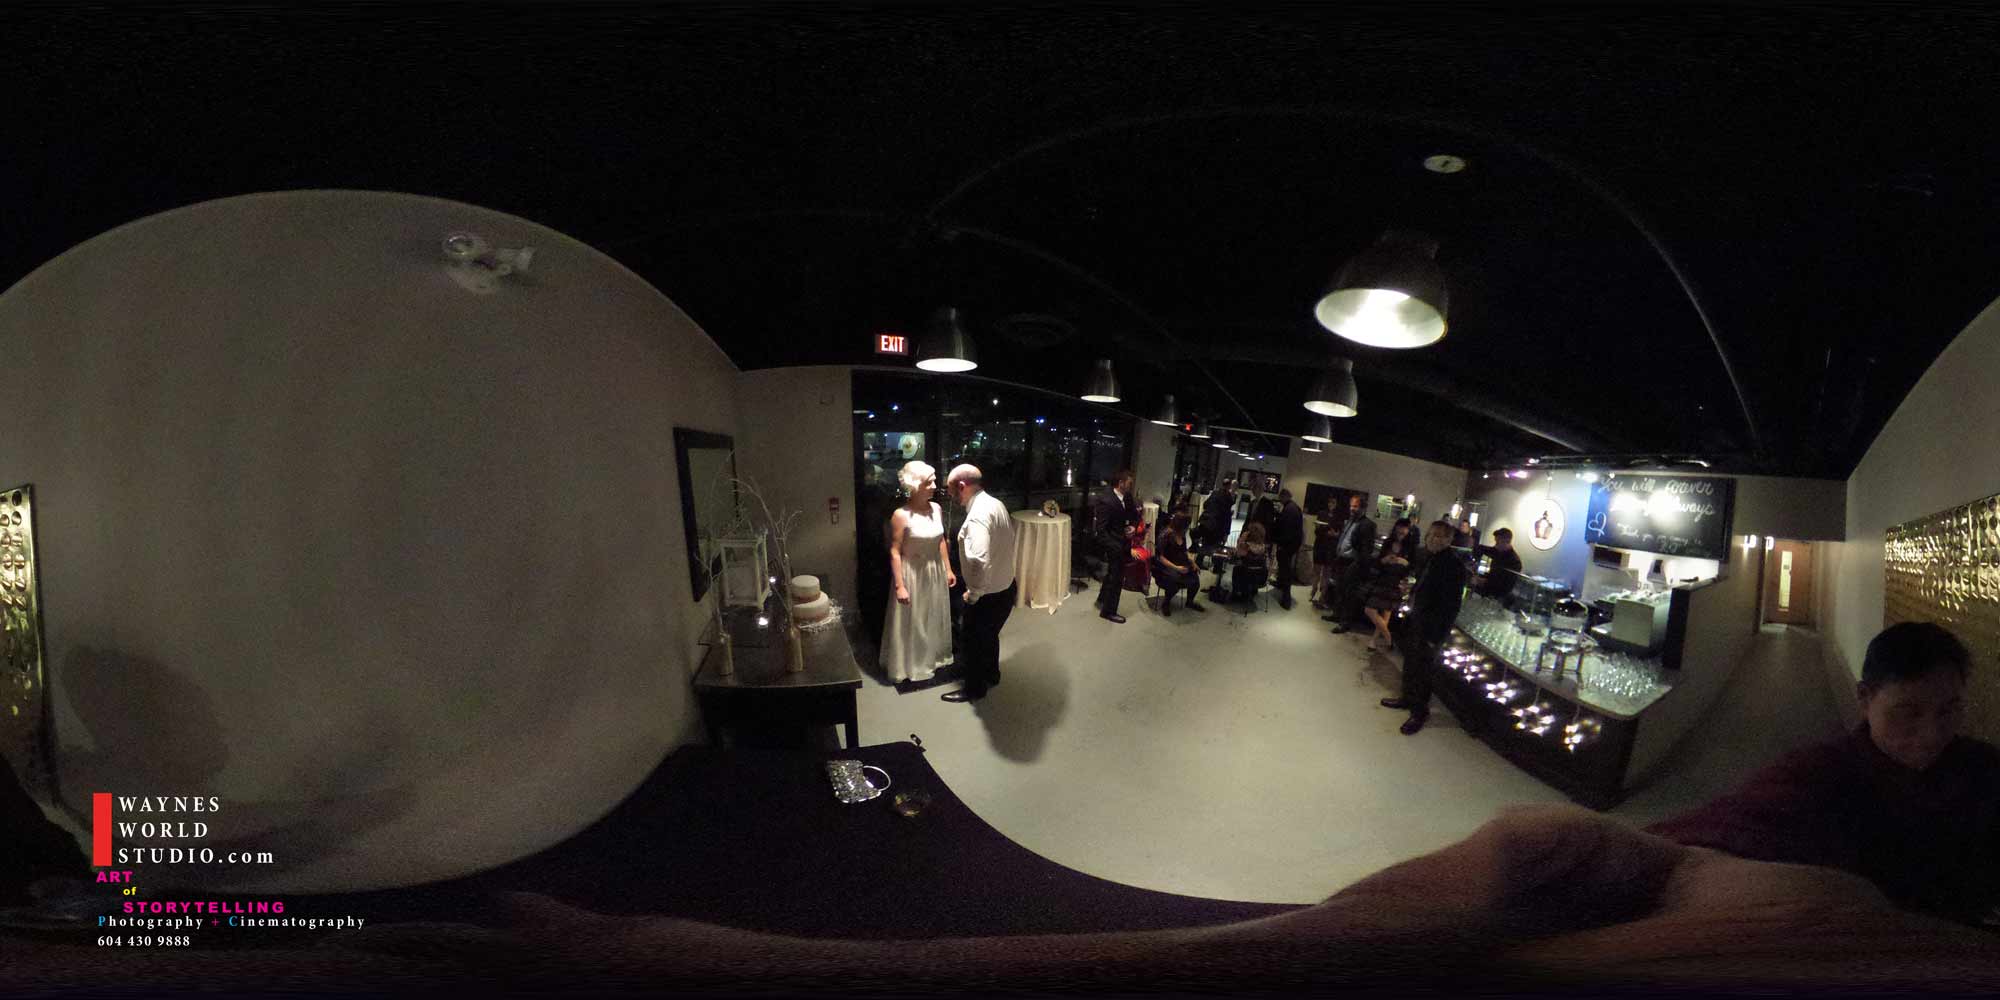 Cake cutting reception with 360 degree VR